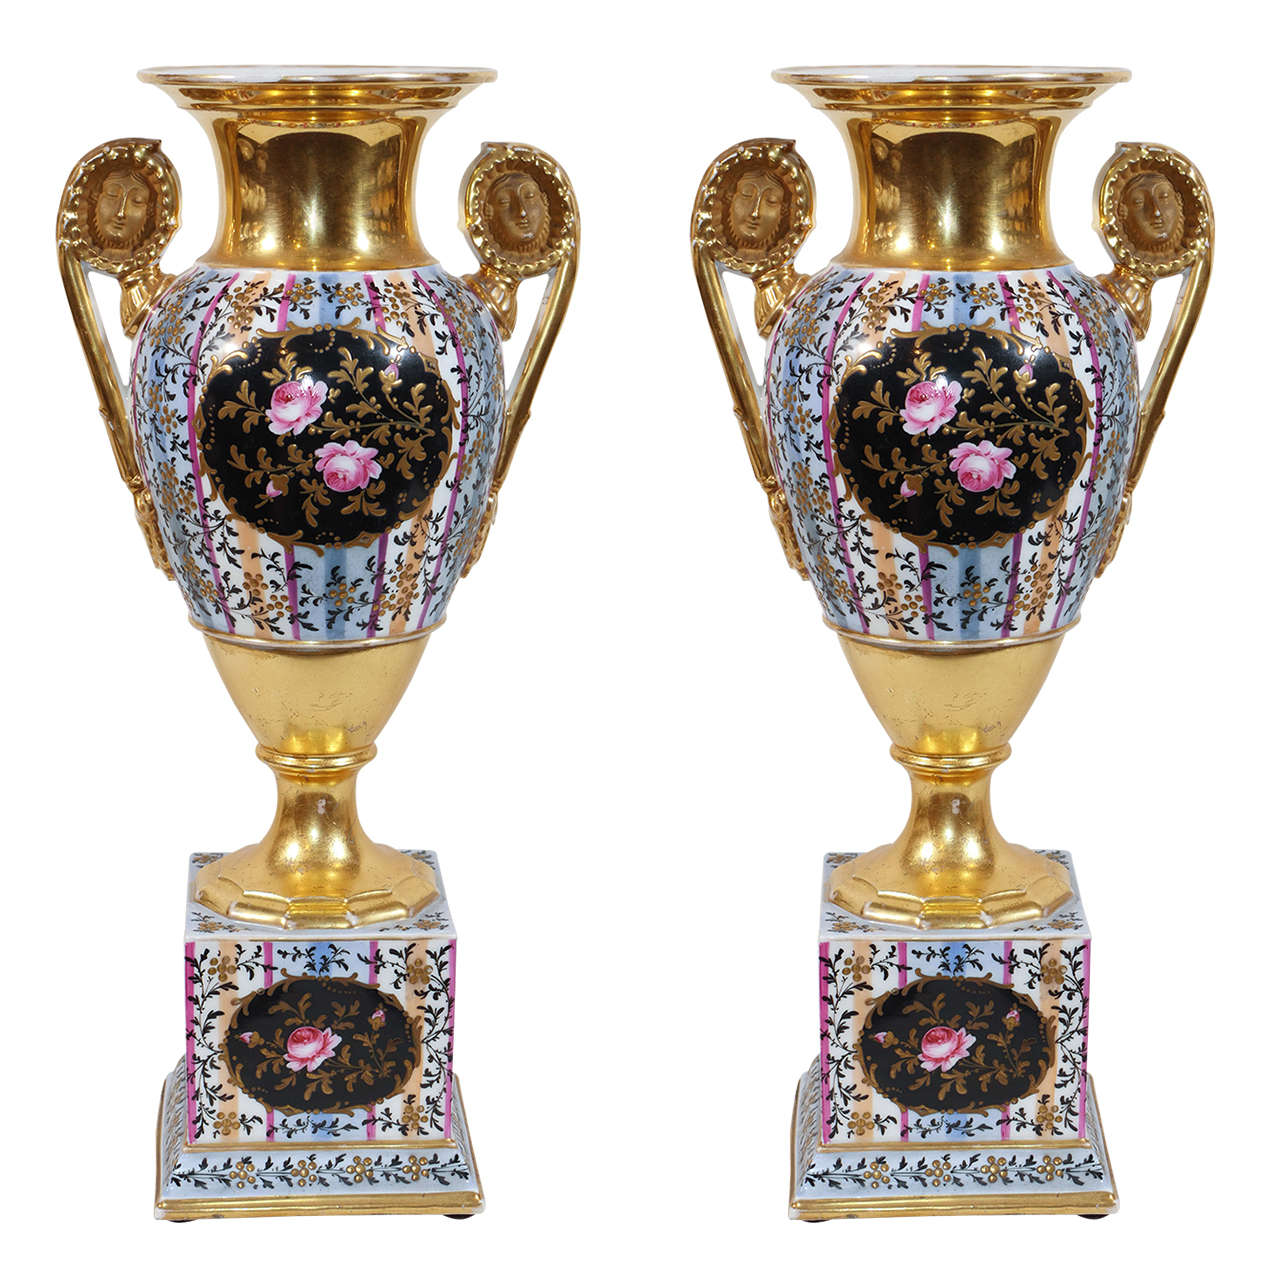 Pair of 19th Century French Vases with Roses